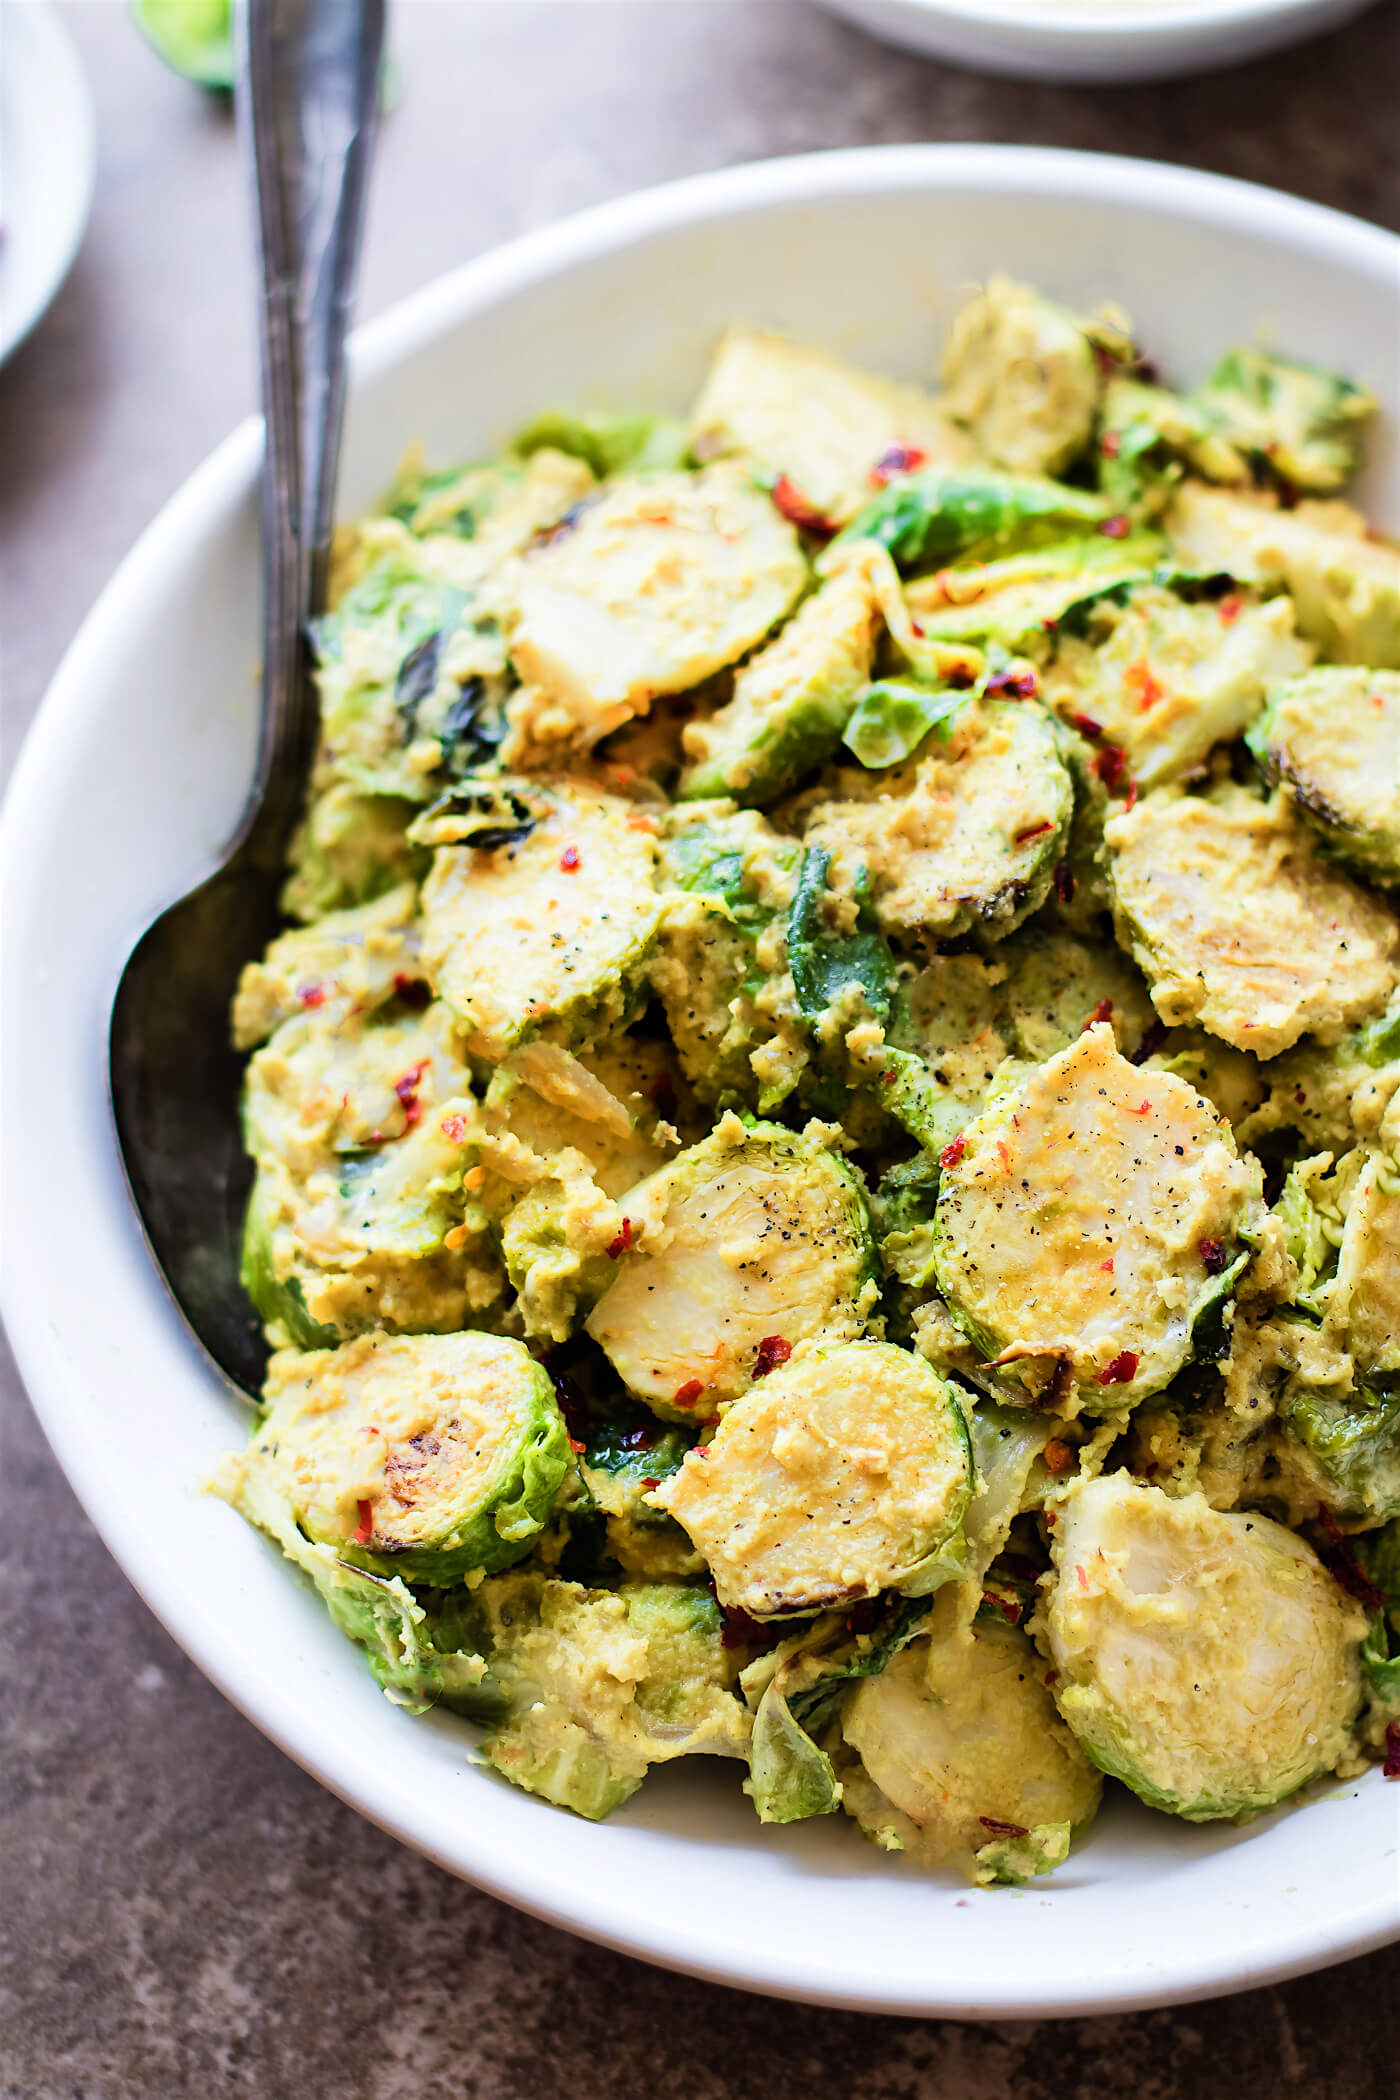 Vegan Creamy Mustard Brussels Sprouts Superfood Salad